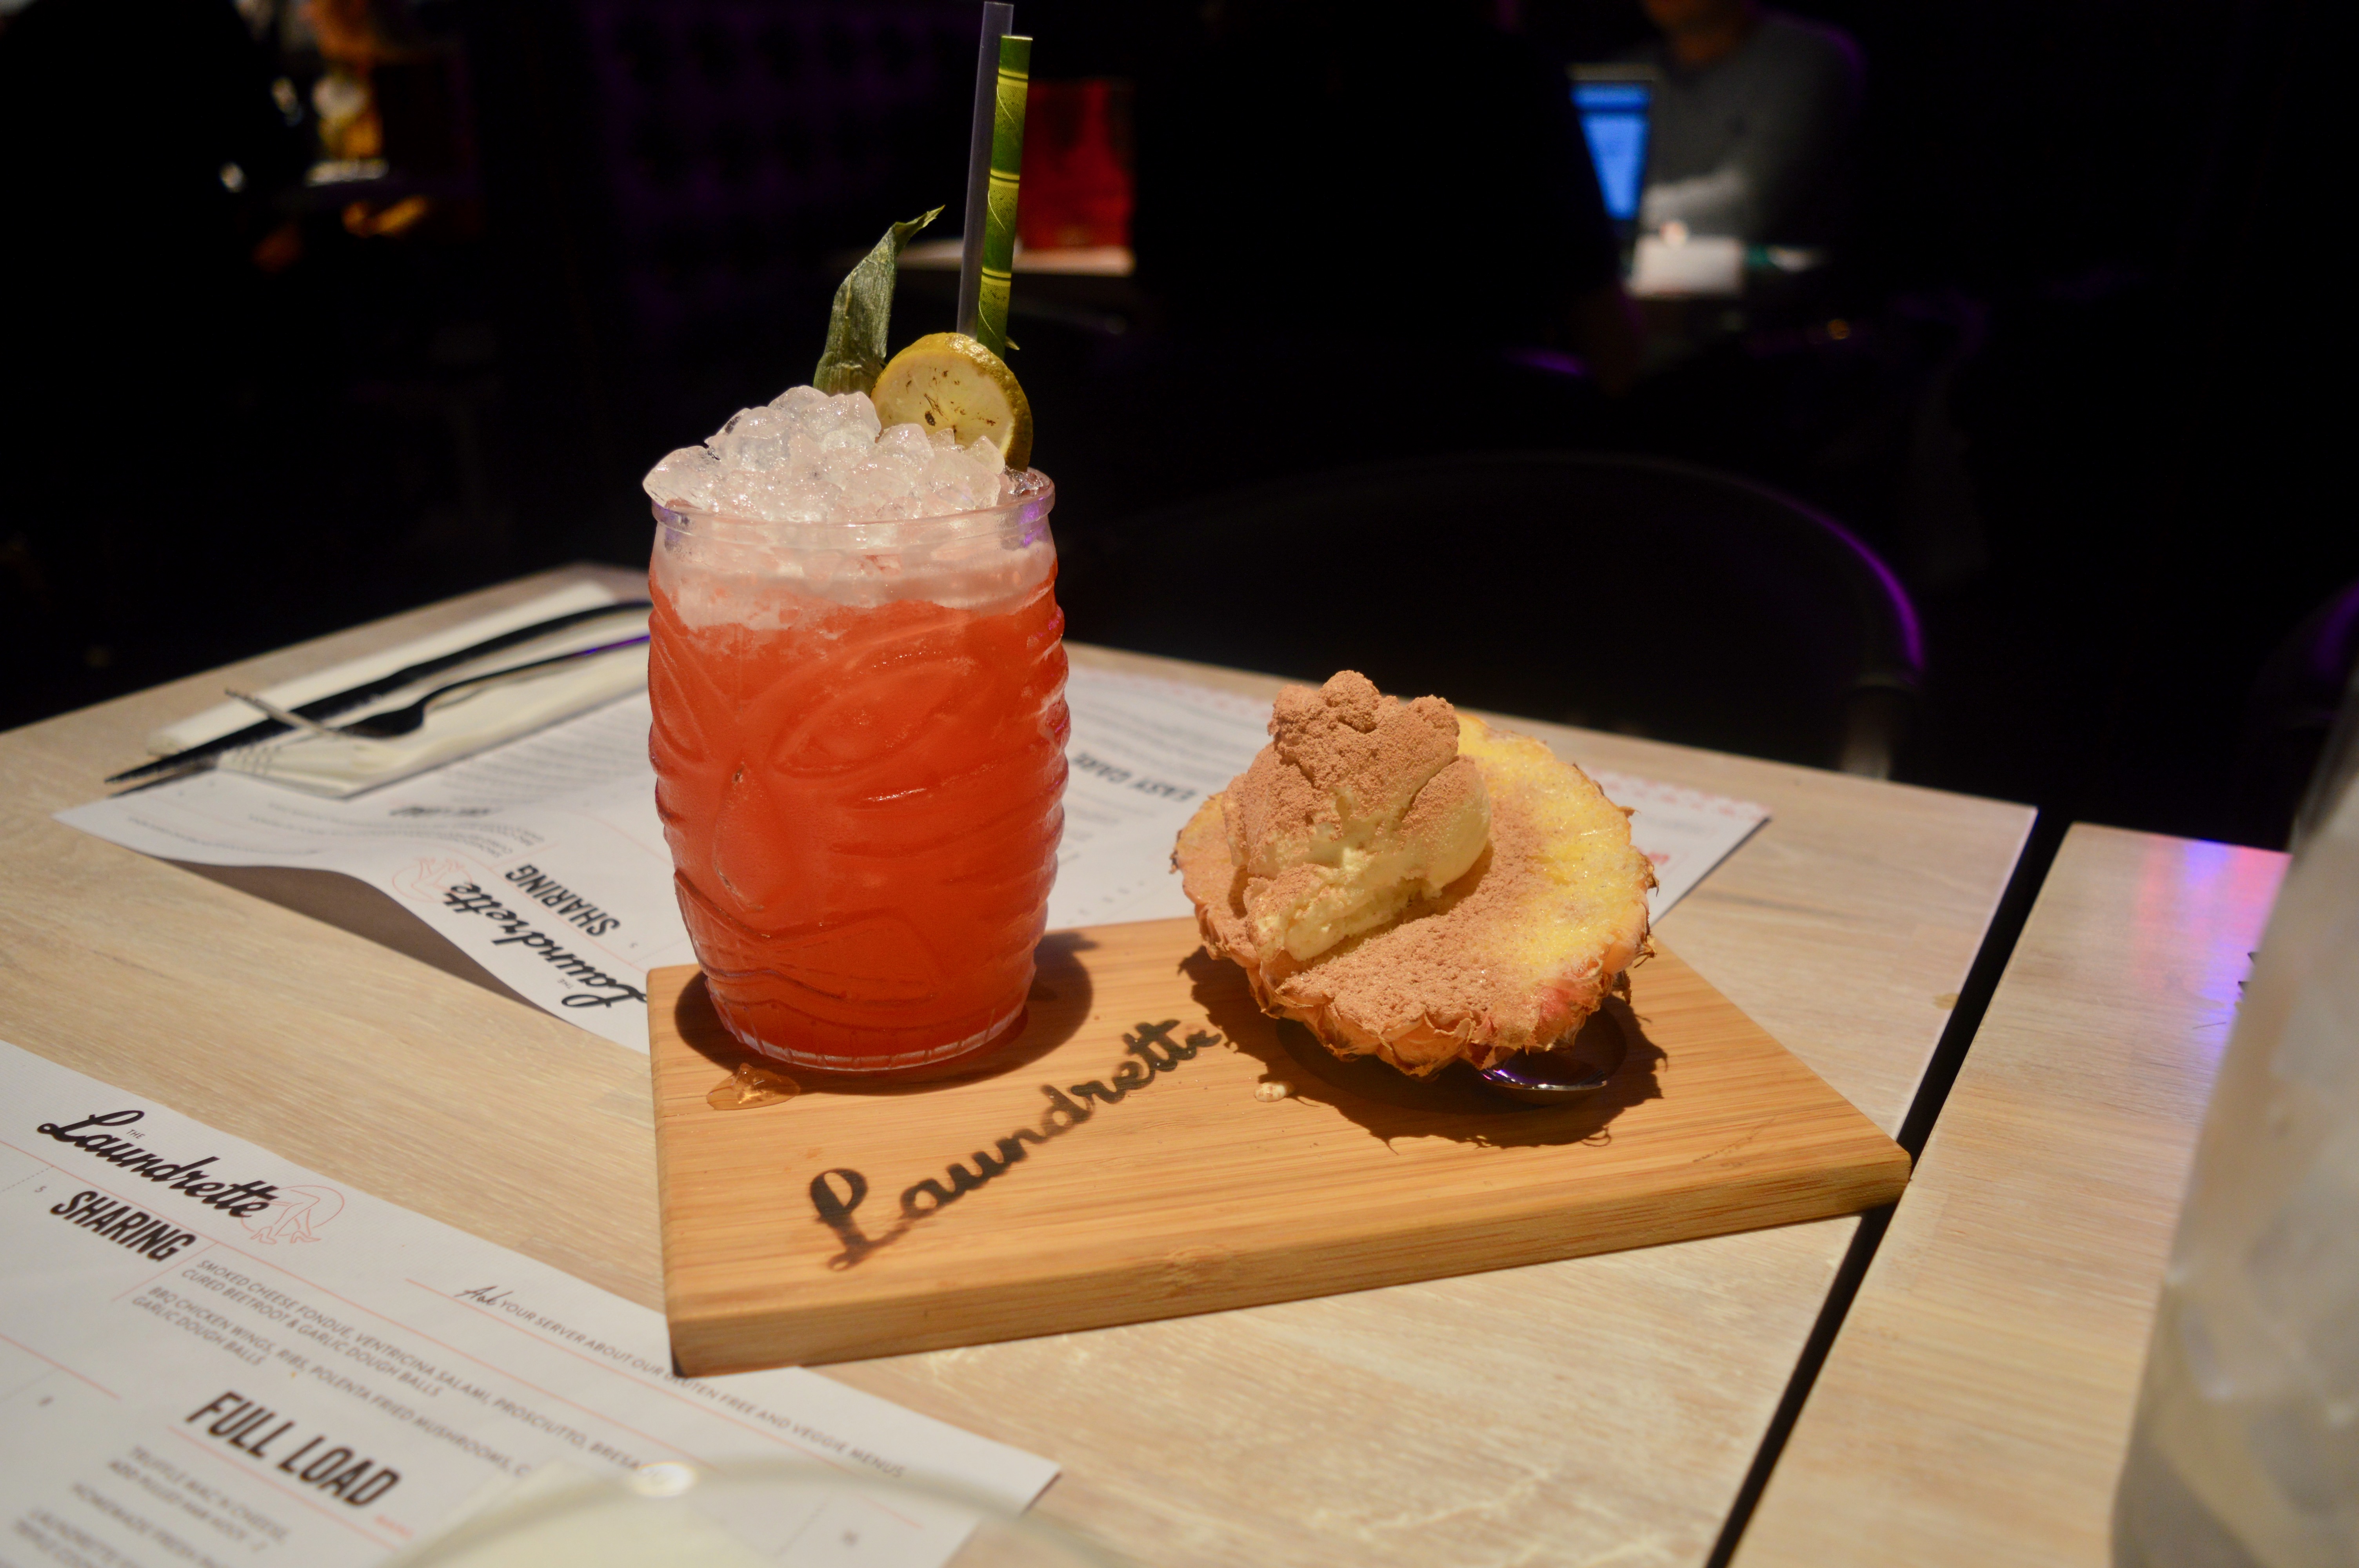 We reviewed the food and cocktail menu at The Laundrette, one of Newcastle's newest hotspots, opposite Central Station| Newcastle City Centre | Check out our thoughts and review | Elle Blonde Luxury Lifestyle Destination Blog